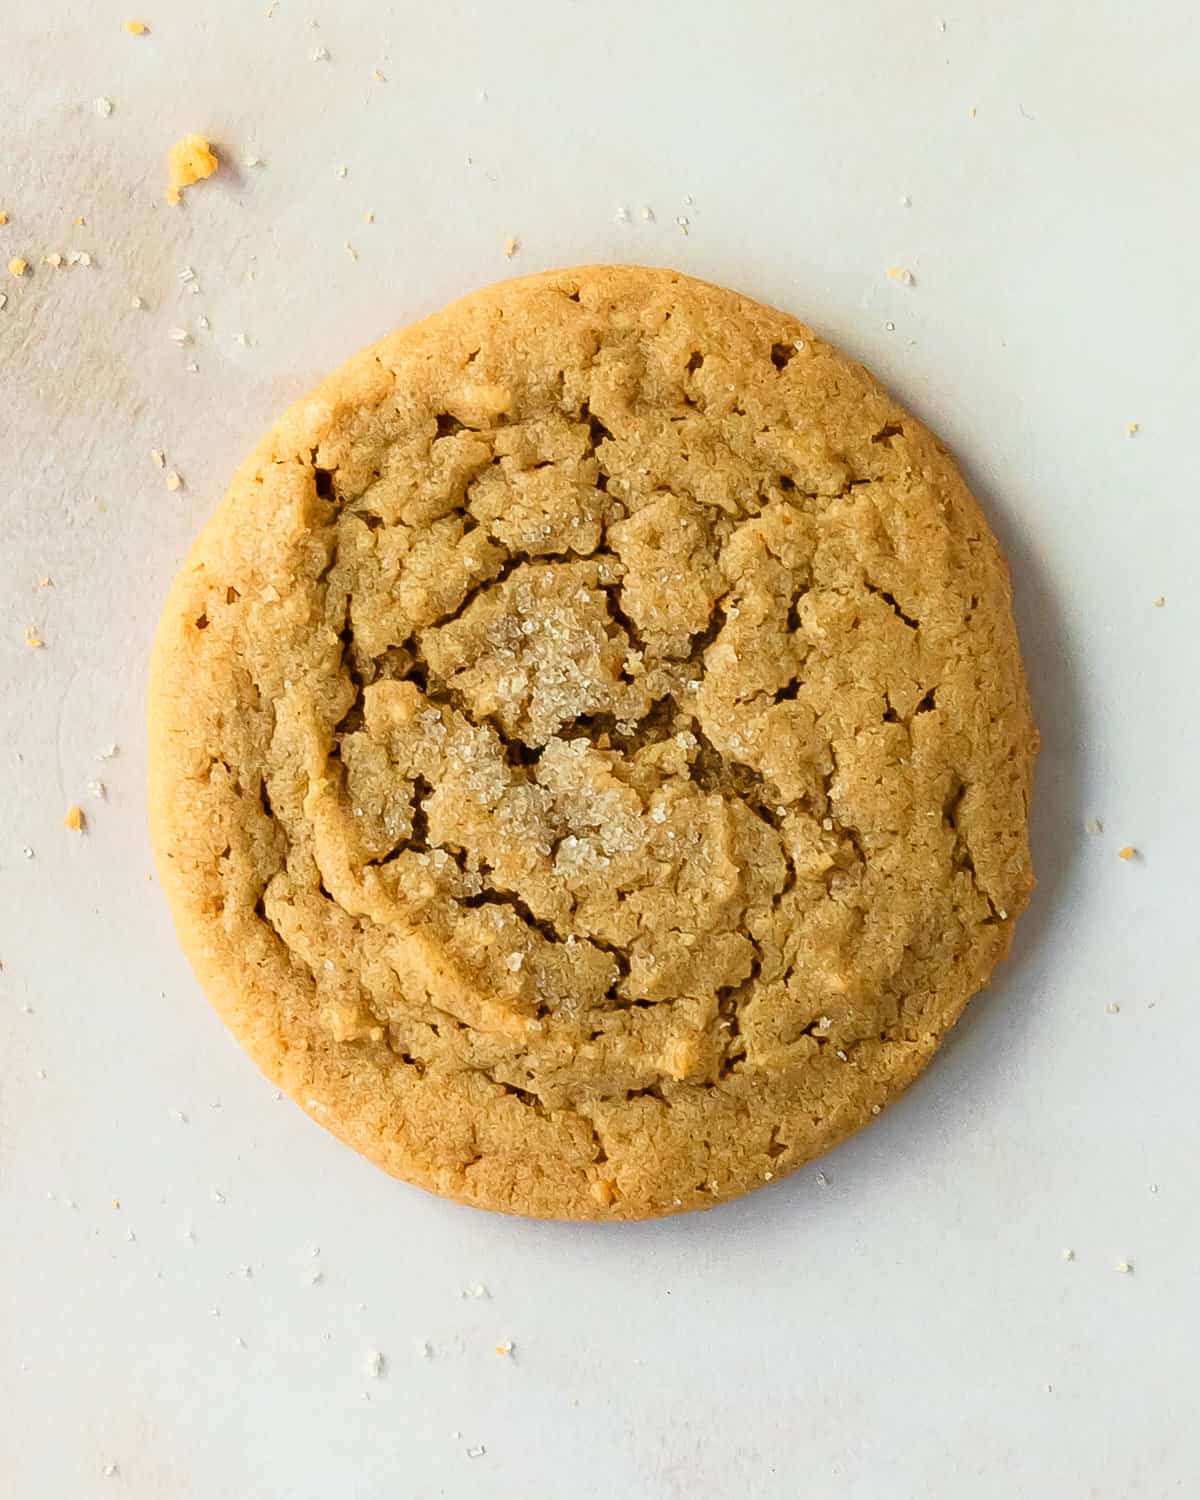 Chewy peanut butter cookies are peanut butter cookies with a rich, buttery, soft and chewy texture. These homemade peanut butter cookies are topped with sprinkle of sugar. What I love most about these soft peanut butter cookies is they are made using simple, old fashioned ingredients that make the best quick and easy cookie.